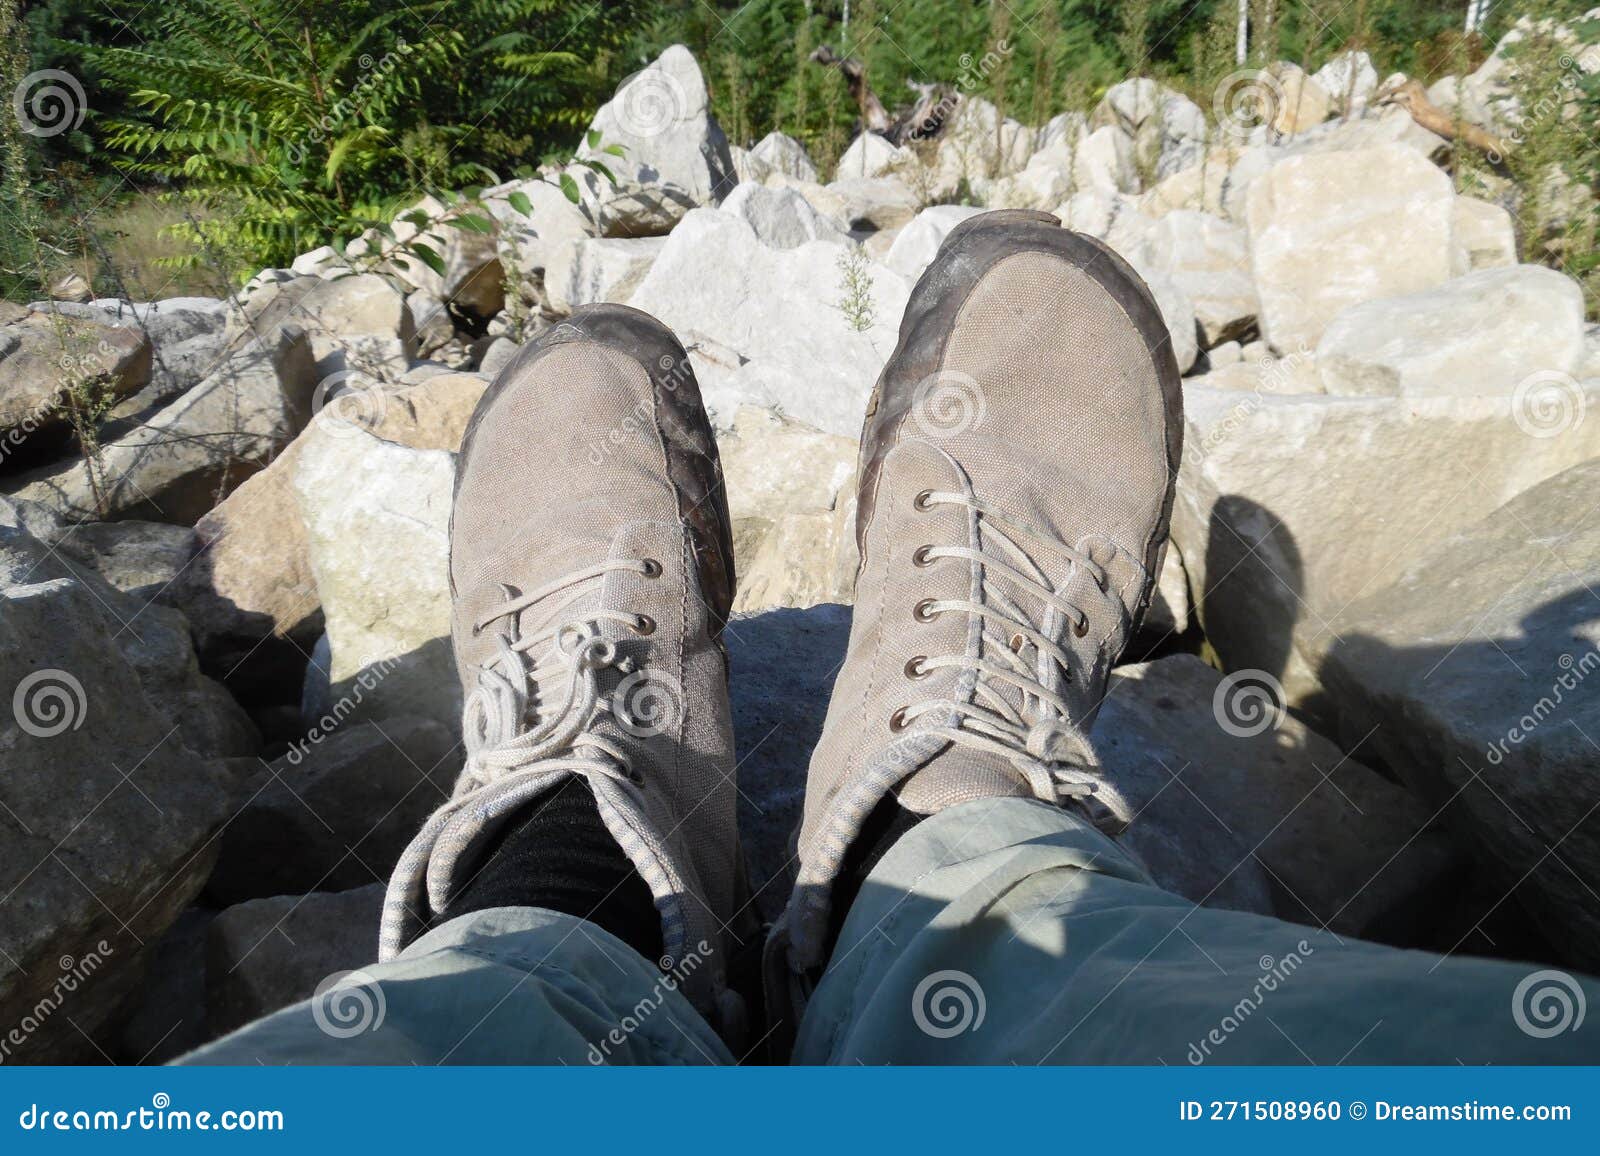 neutral grey barefoot running shoes . foot view with white stoned background . natural grey sandy stone colors matching with shoes